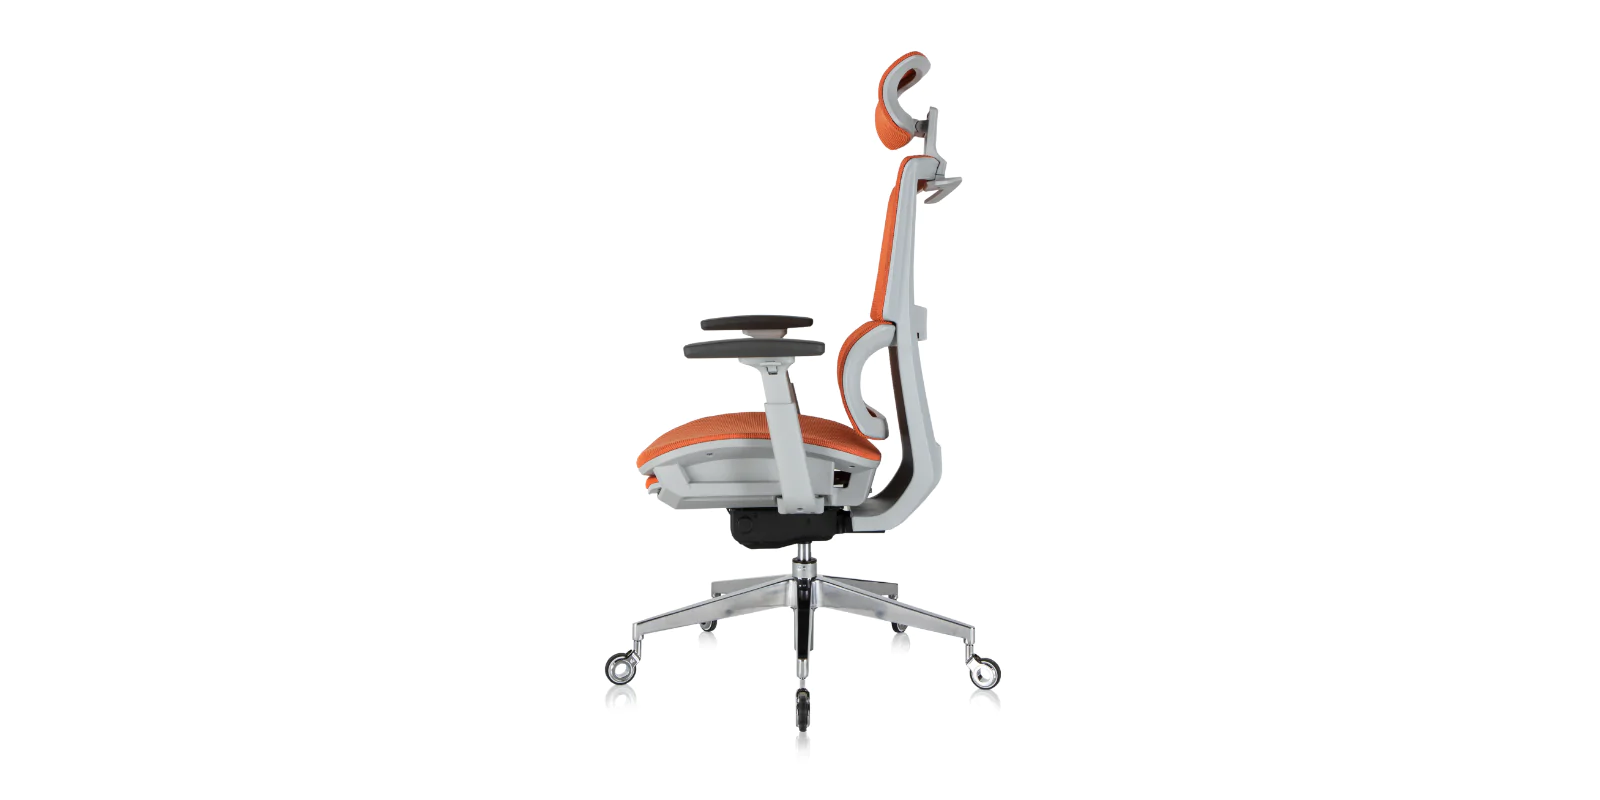 What is the best computer chair with lumbar support?